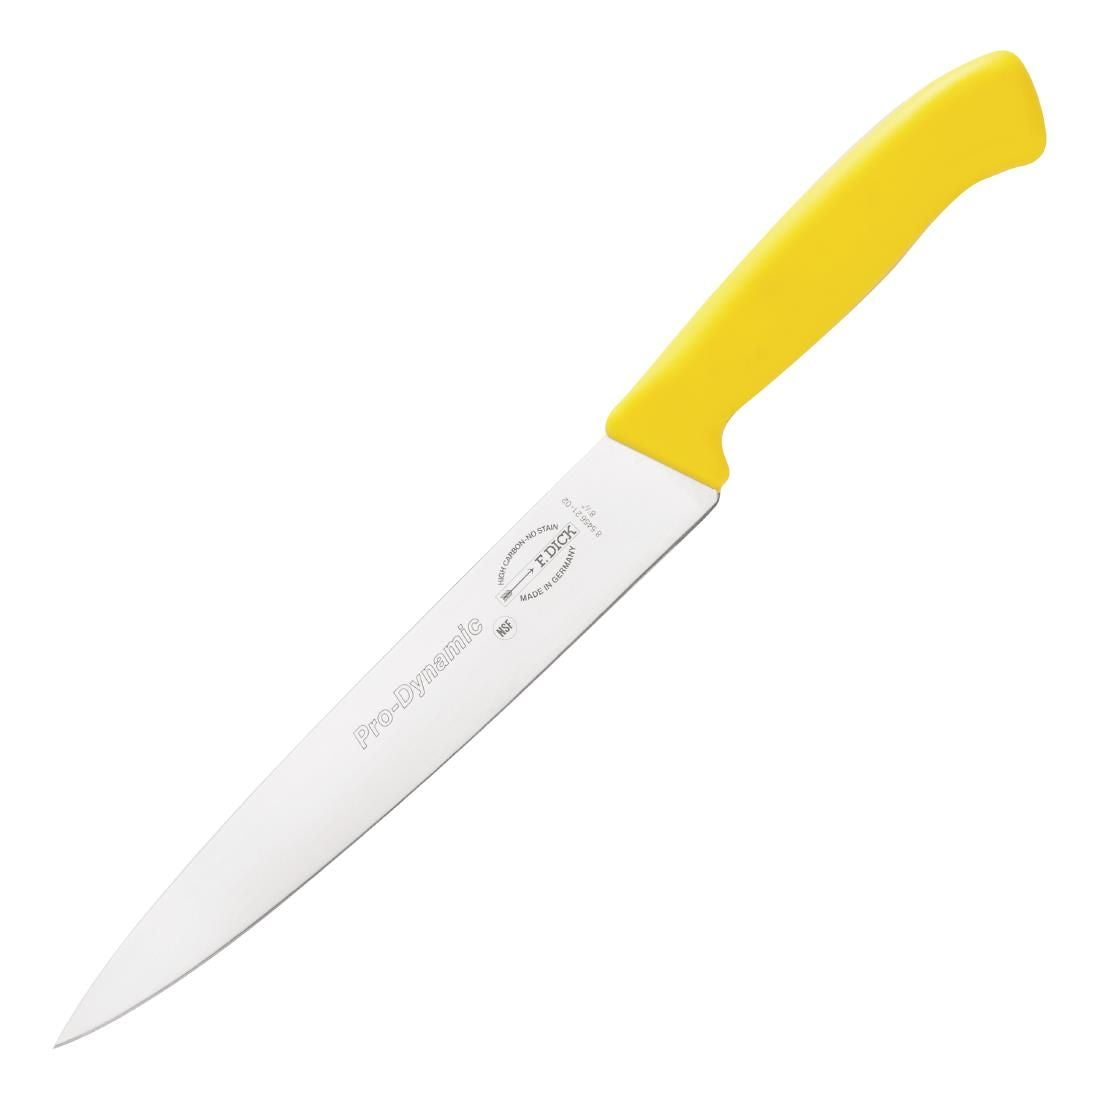 DL358 Dick Pro Dynamic HACCP Slicer Yellow 21.5cm JD Catering Equipment Solutions Ltd